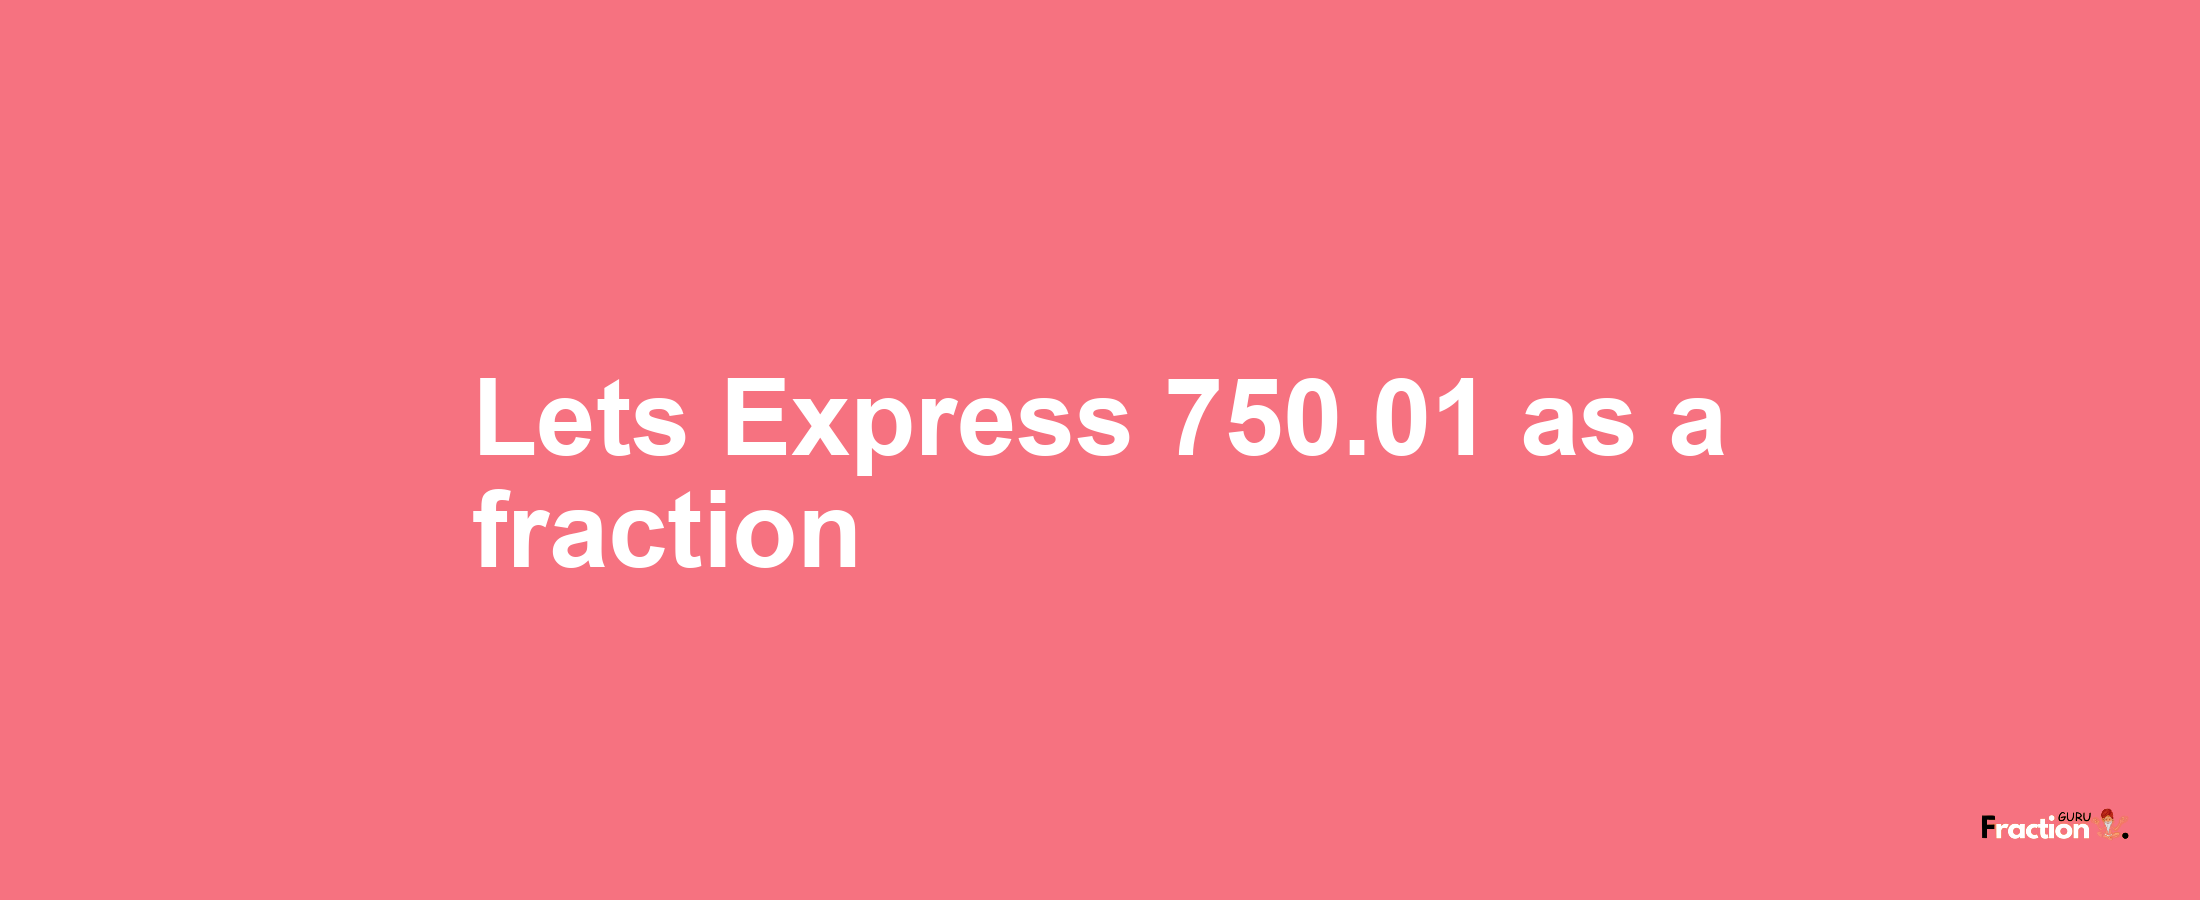 Lets Express 750.01 as afraction